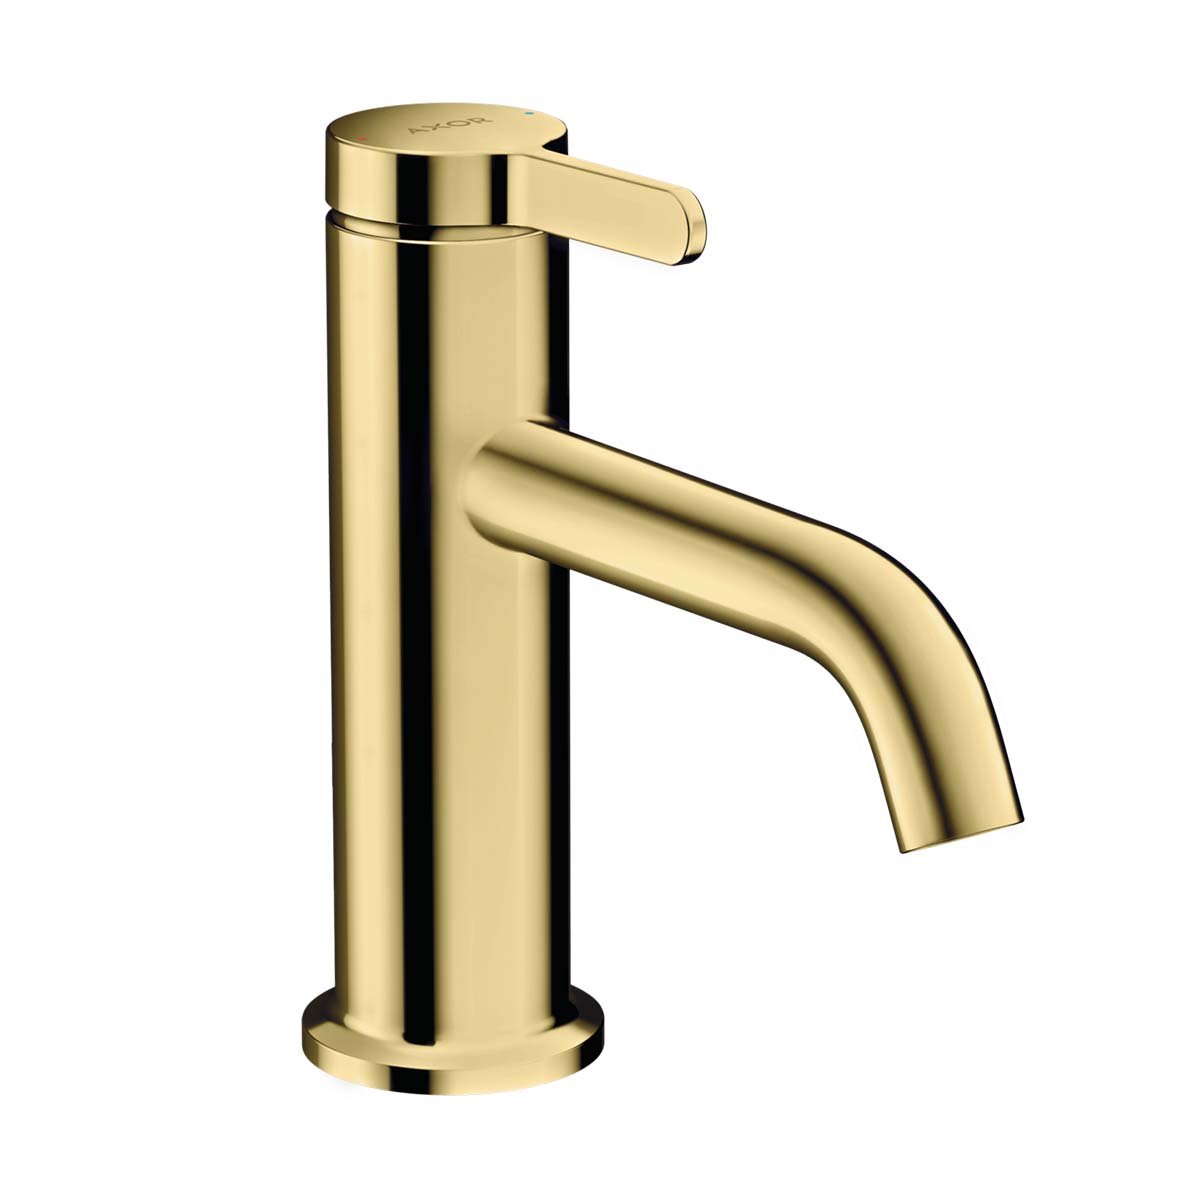 Axor One 70 Single Lever Basin Mixer Tap with Waste Polished Brass